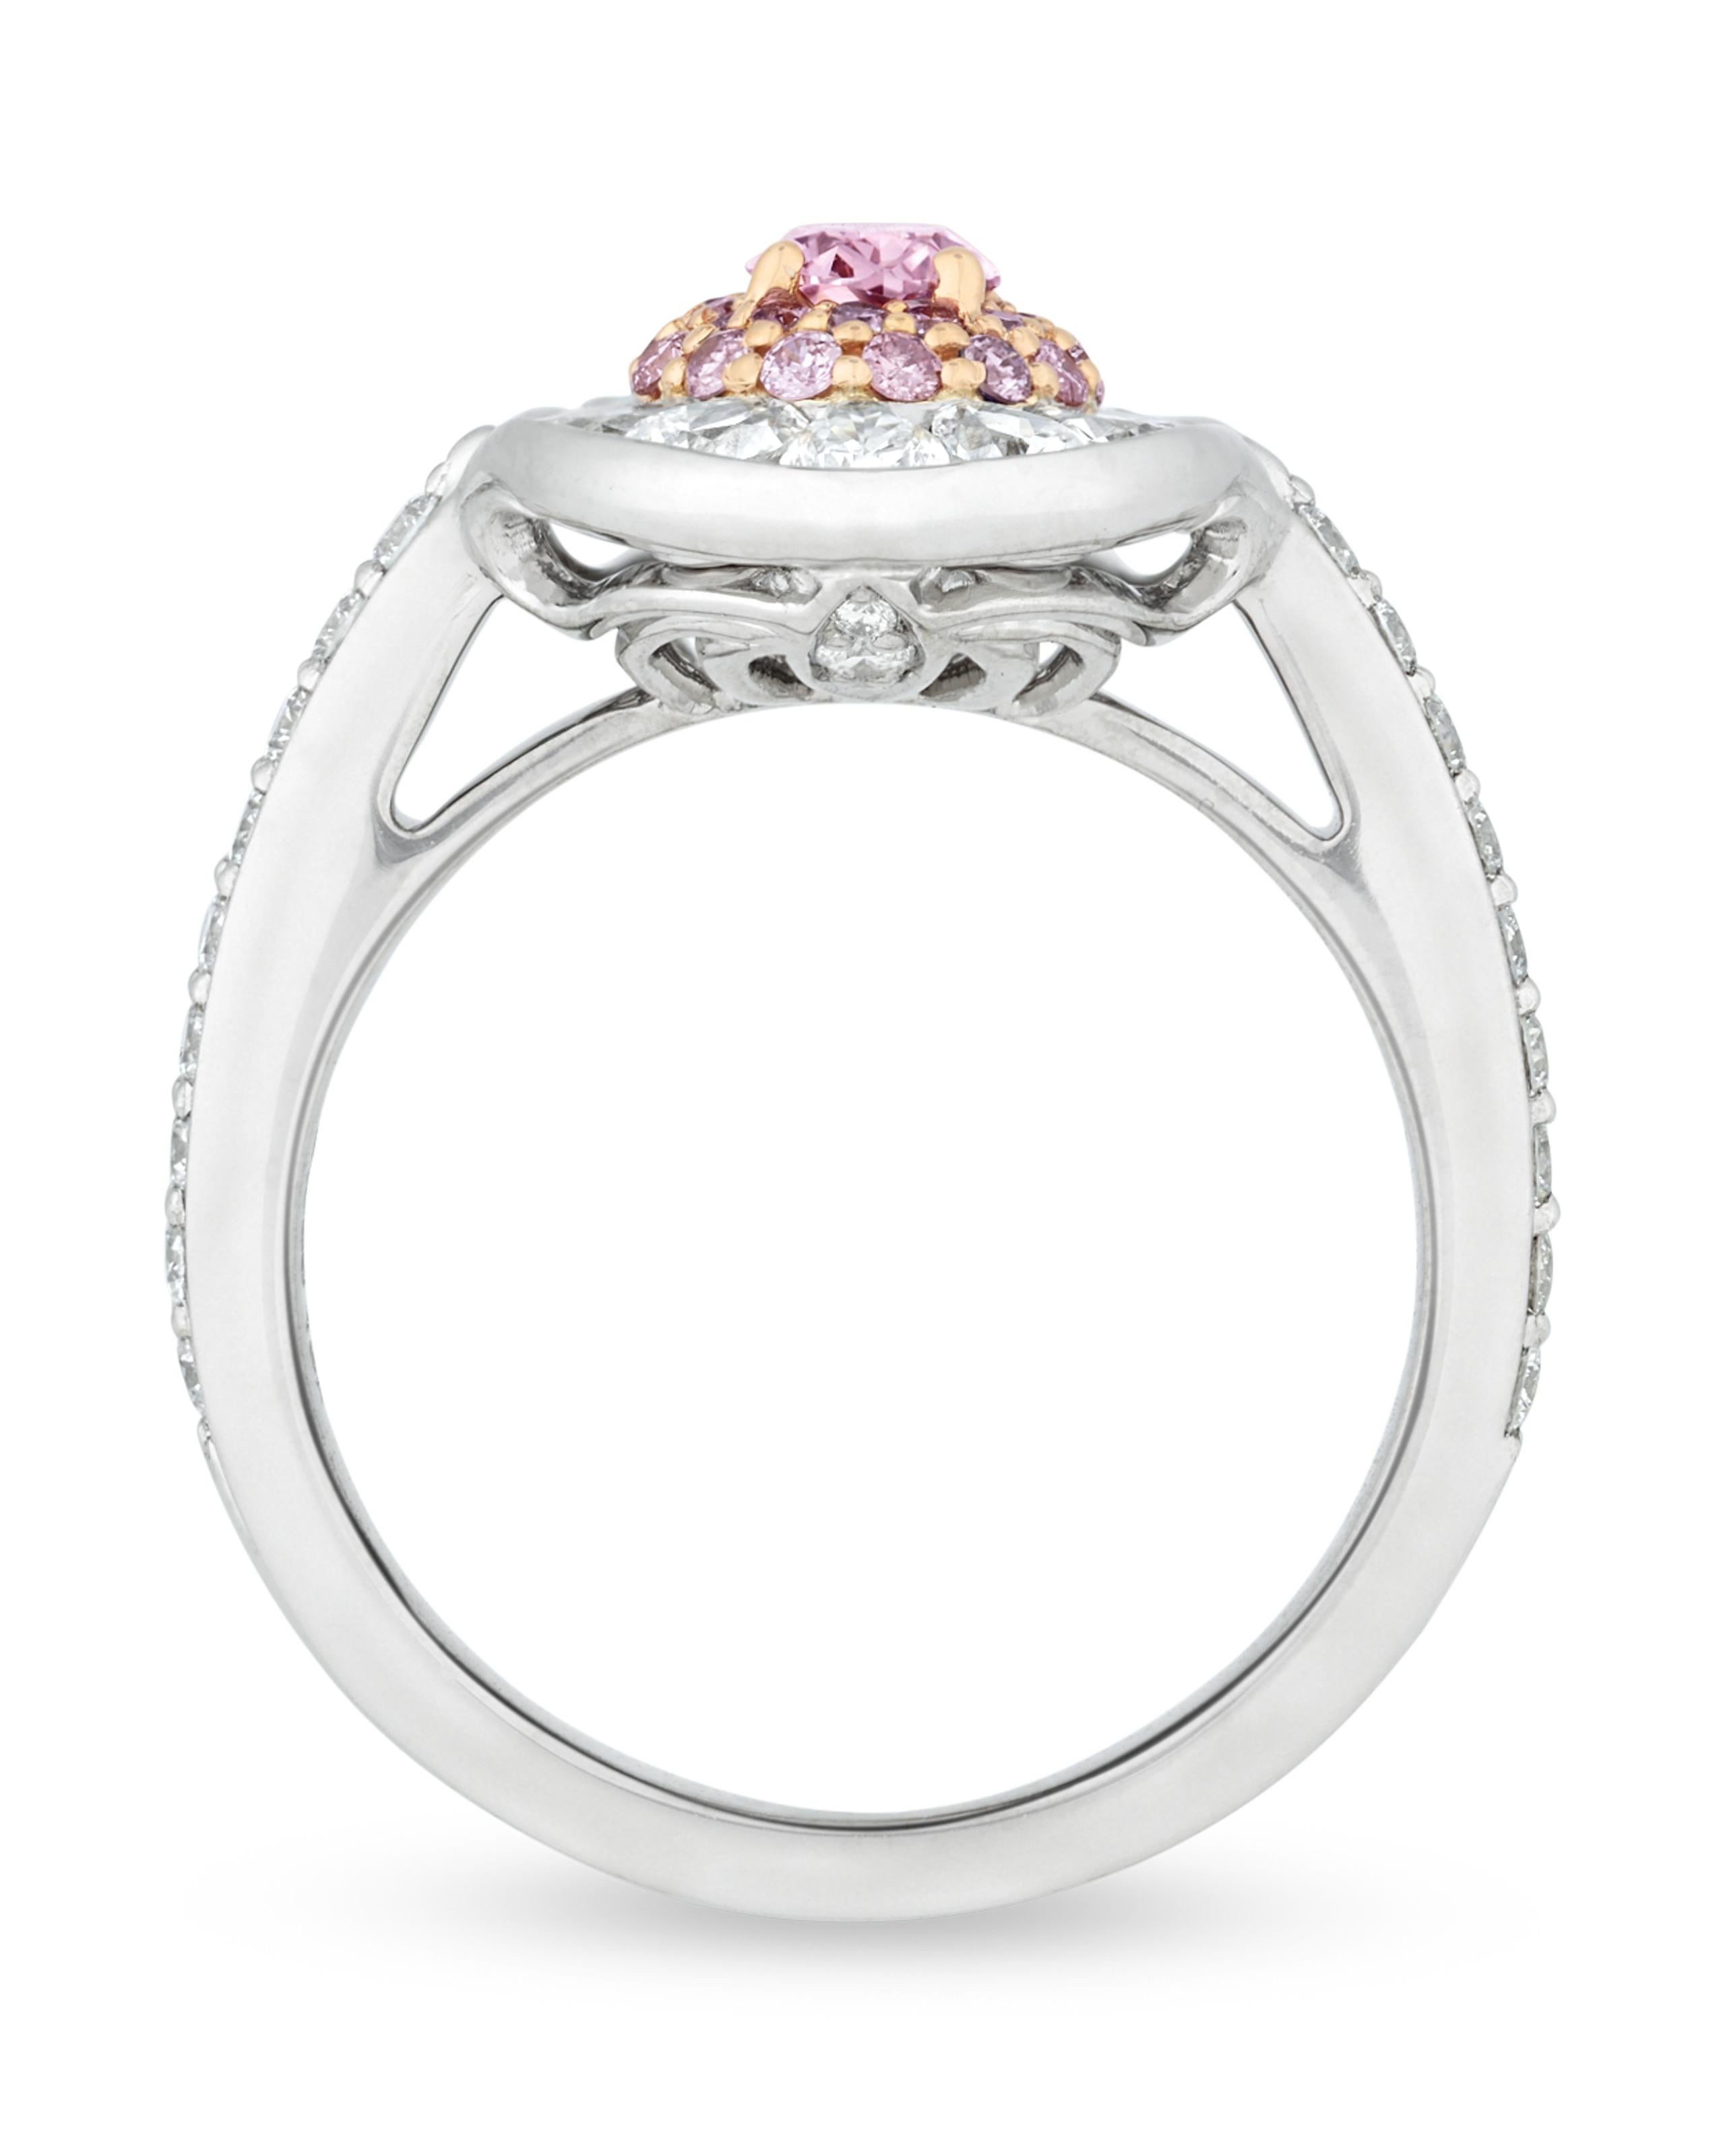 One of nature’s rarest treasures, the 0.32-carat natural fancy vivid pink diamond at the center of this ring displays a romantic pink hue. While pink diamonds come in an array of hues and tones, the very best are graded “fancy vivid” and display the